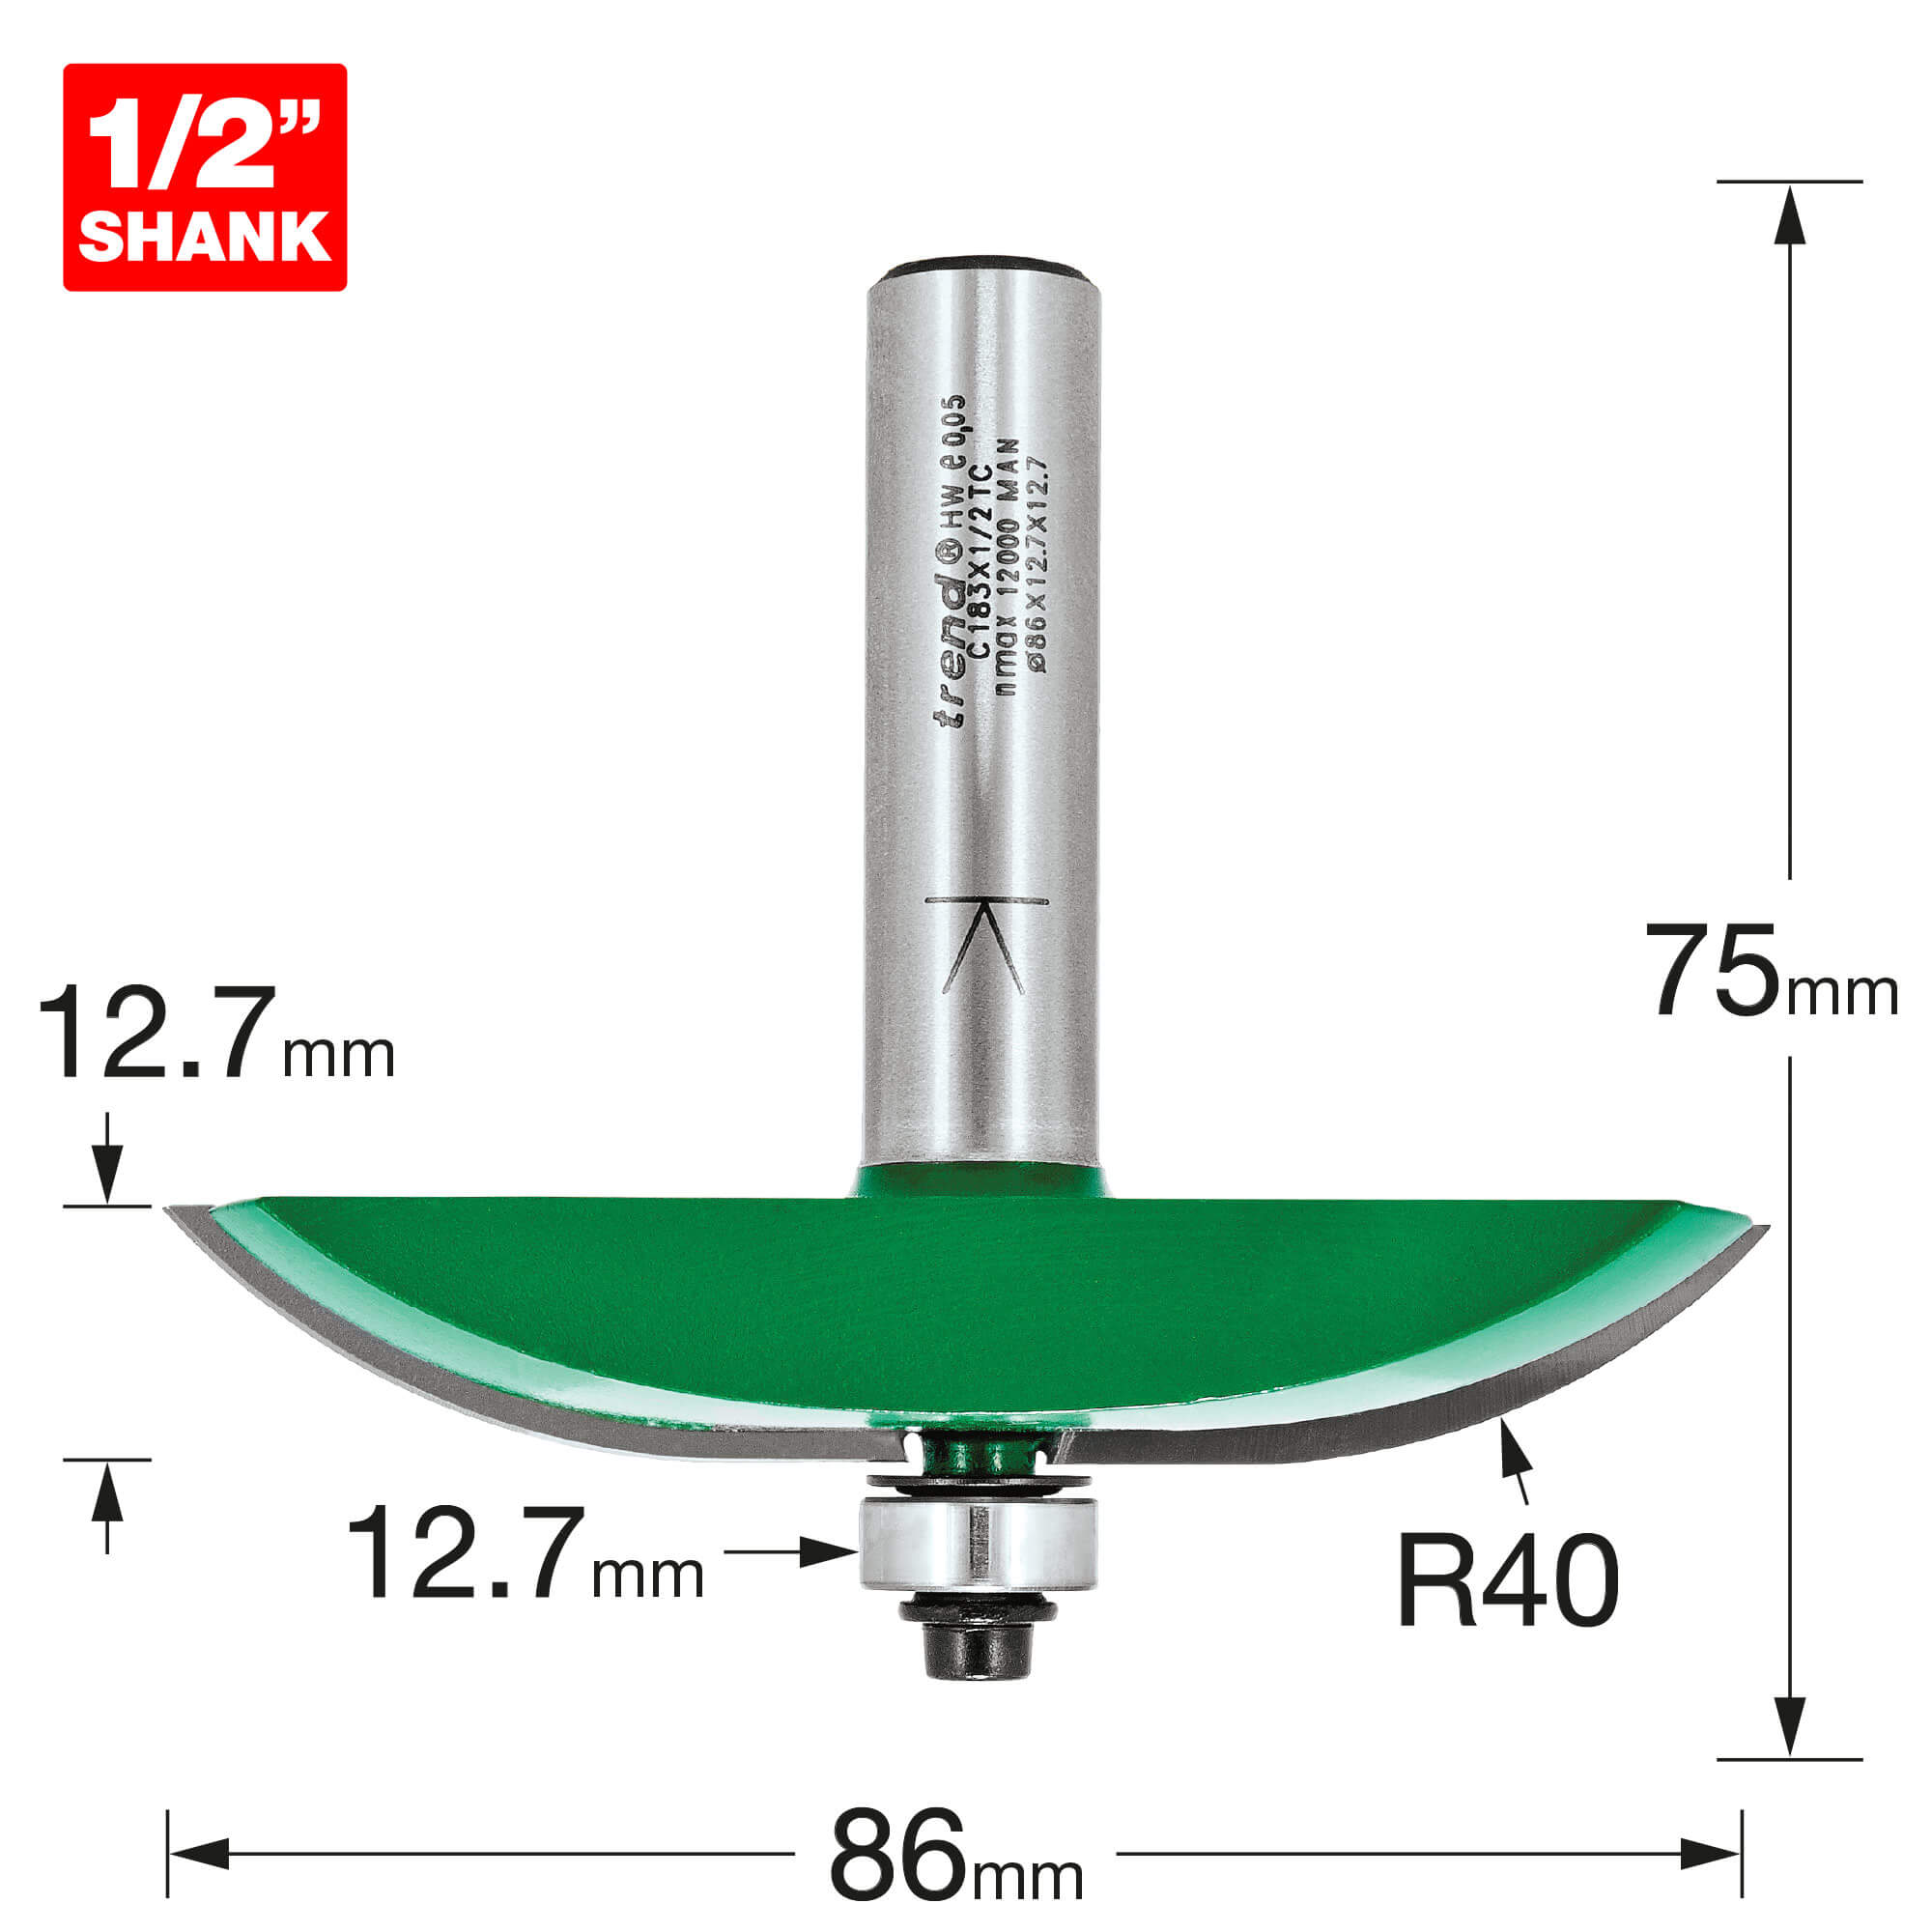 Image of Trend CRAFTPRO Bearing Guided Large Radius Panel Raiser Router Cutter 86mm 12.7mm 1/2"